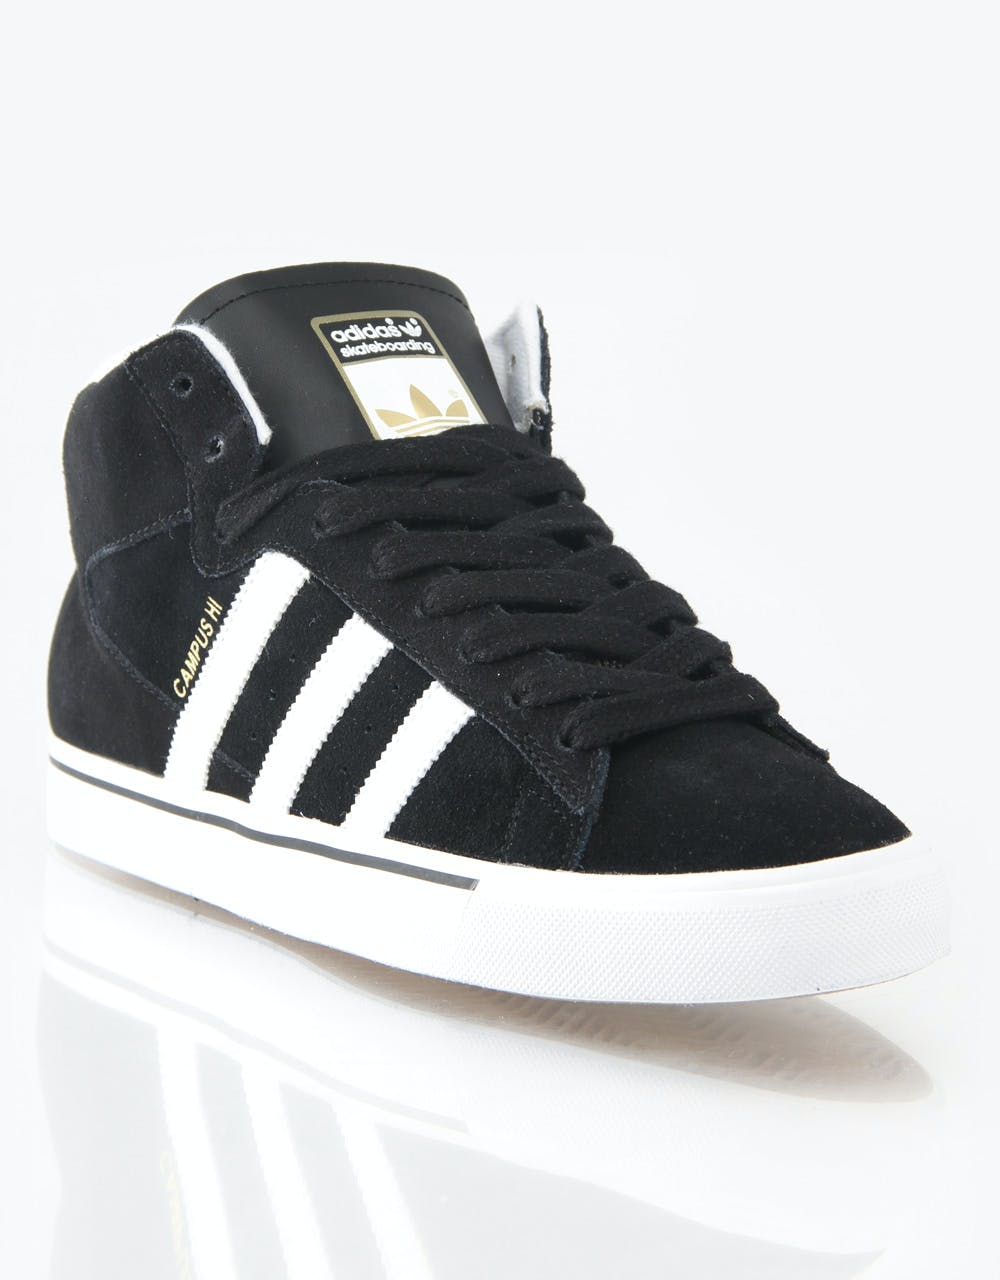 Petrificar Conciso Oficial qqqwjf.adidas mid skate shoes , Off 63%,dolphin-yachts.com